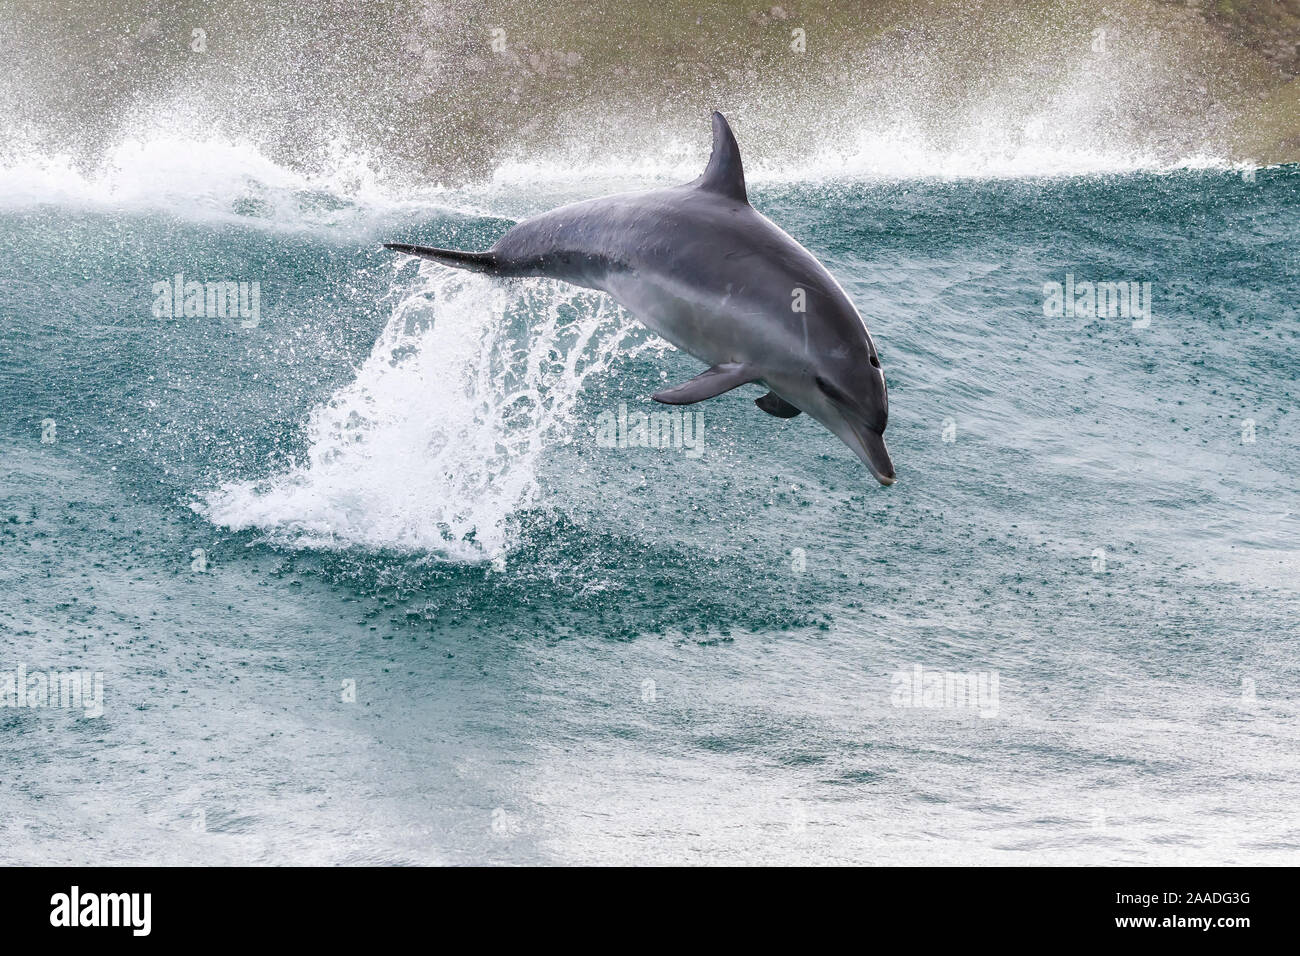 Indo-Pacific bottlenose dolphin (Tursiops aduncus) leaping out of waves, South Africa. Stock Photo